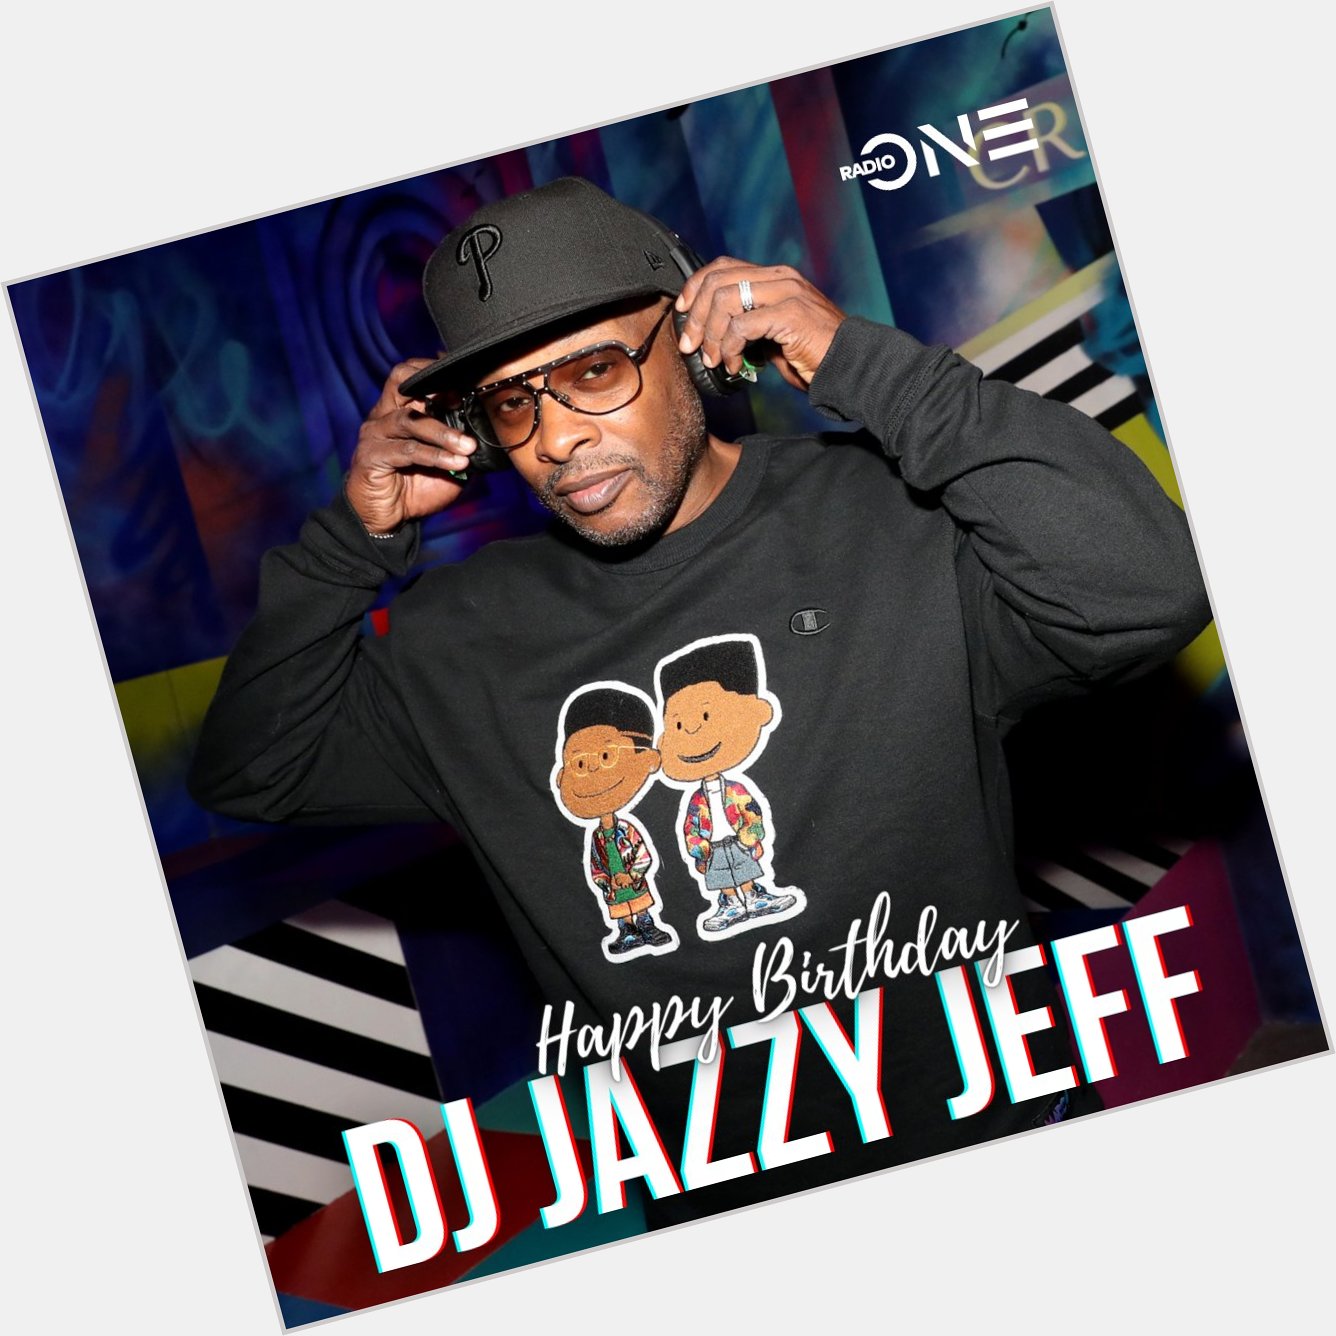 Happy Birthday wishes going out to Hip-Hop legend DJ Jazzy Jeff!! 